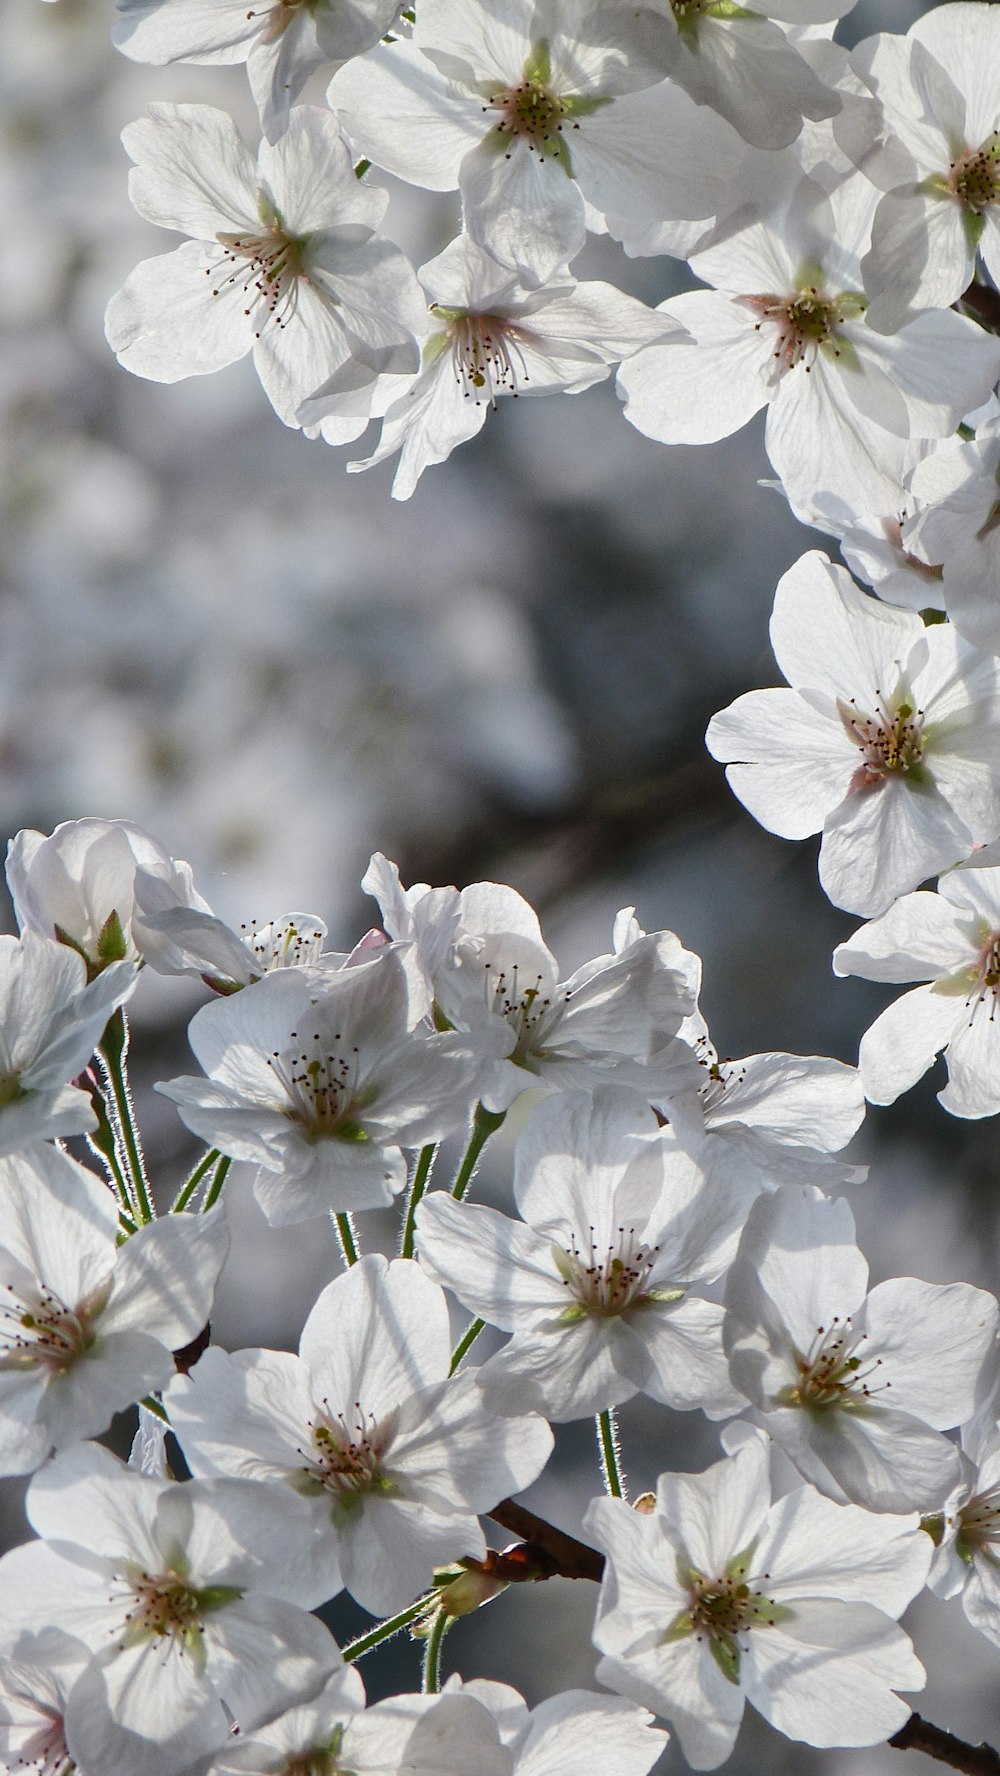 white cherry blossom in close up photography